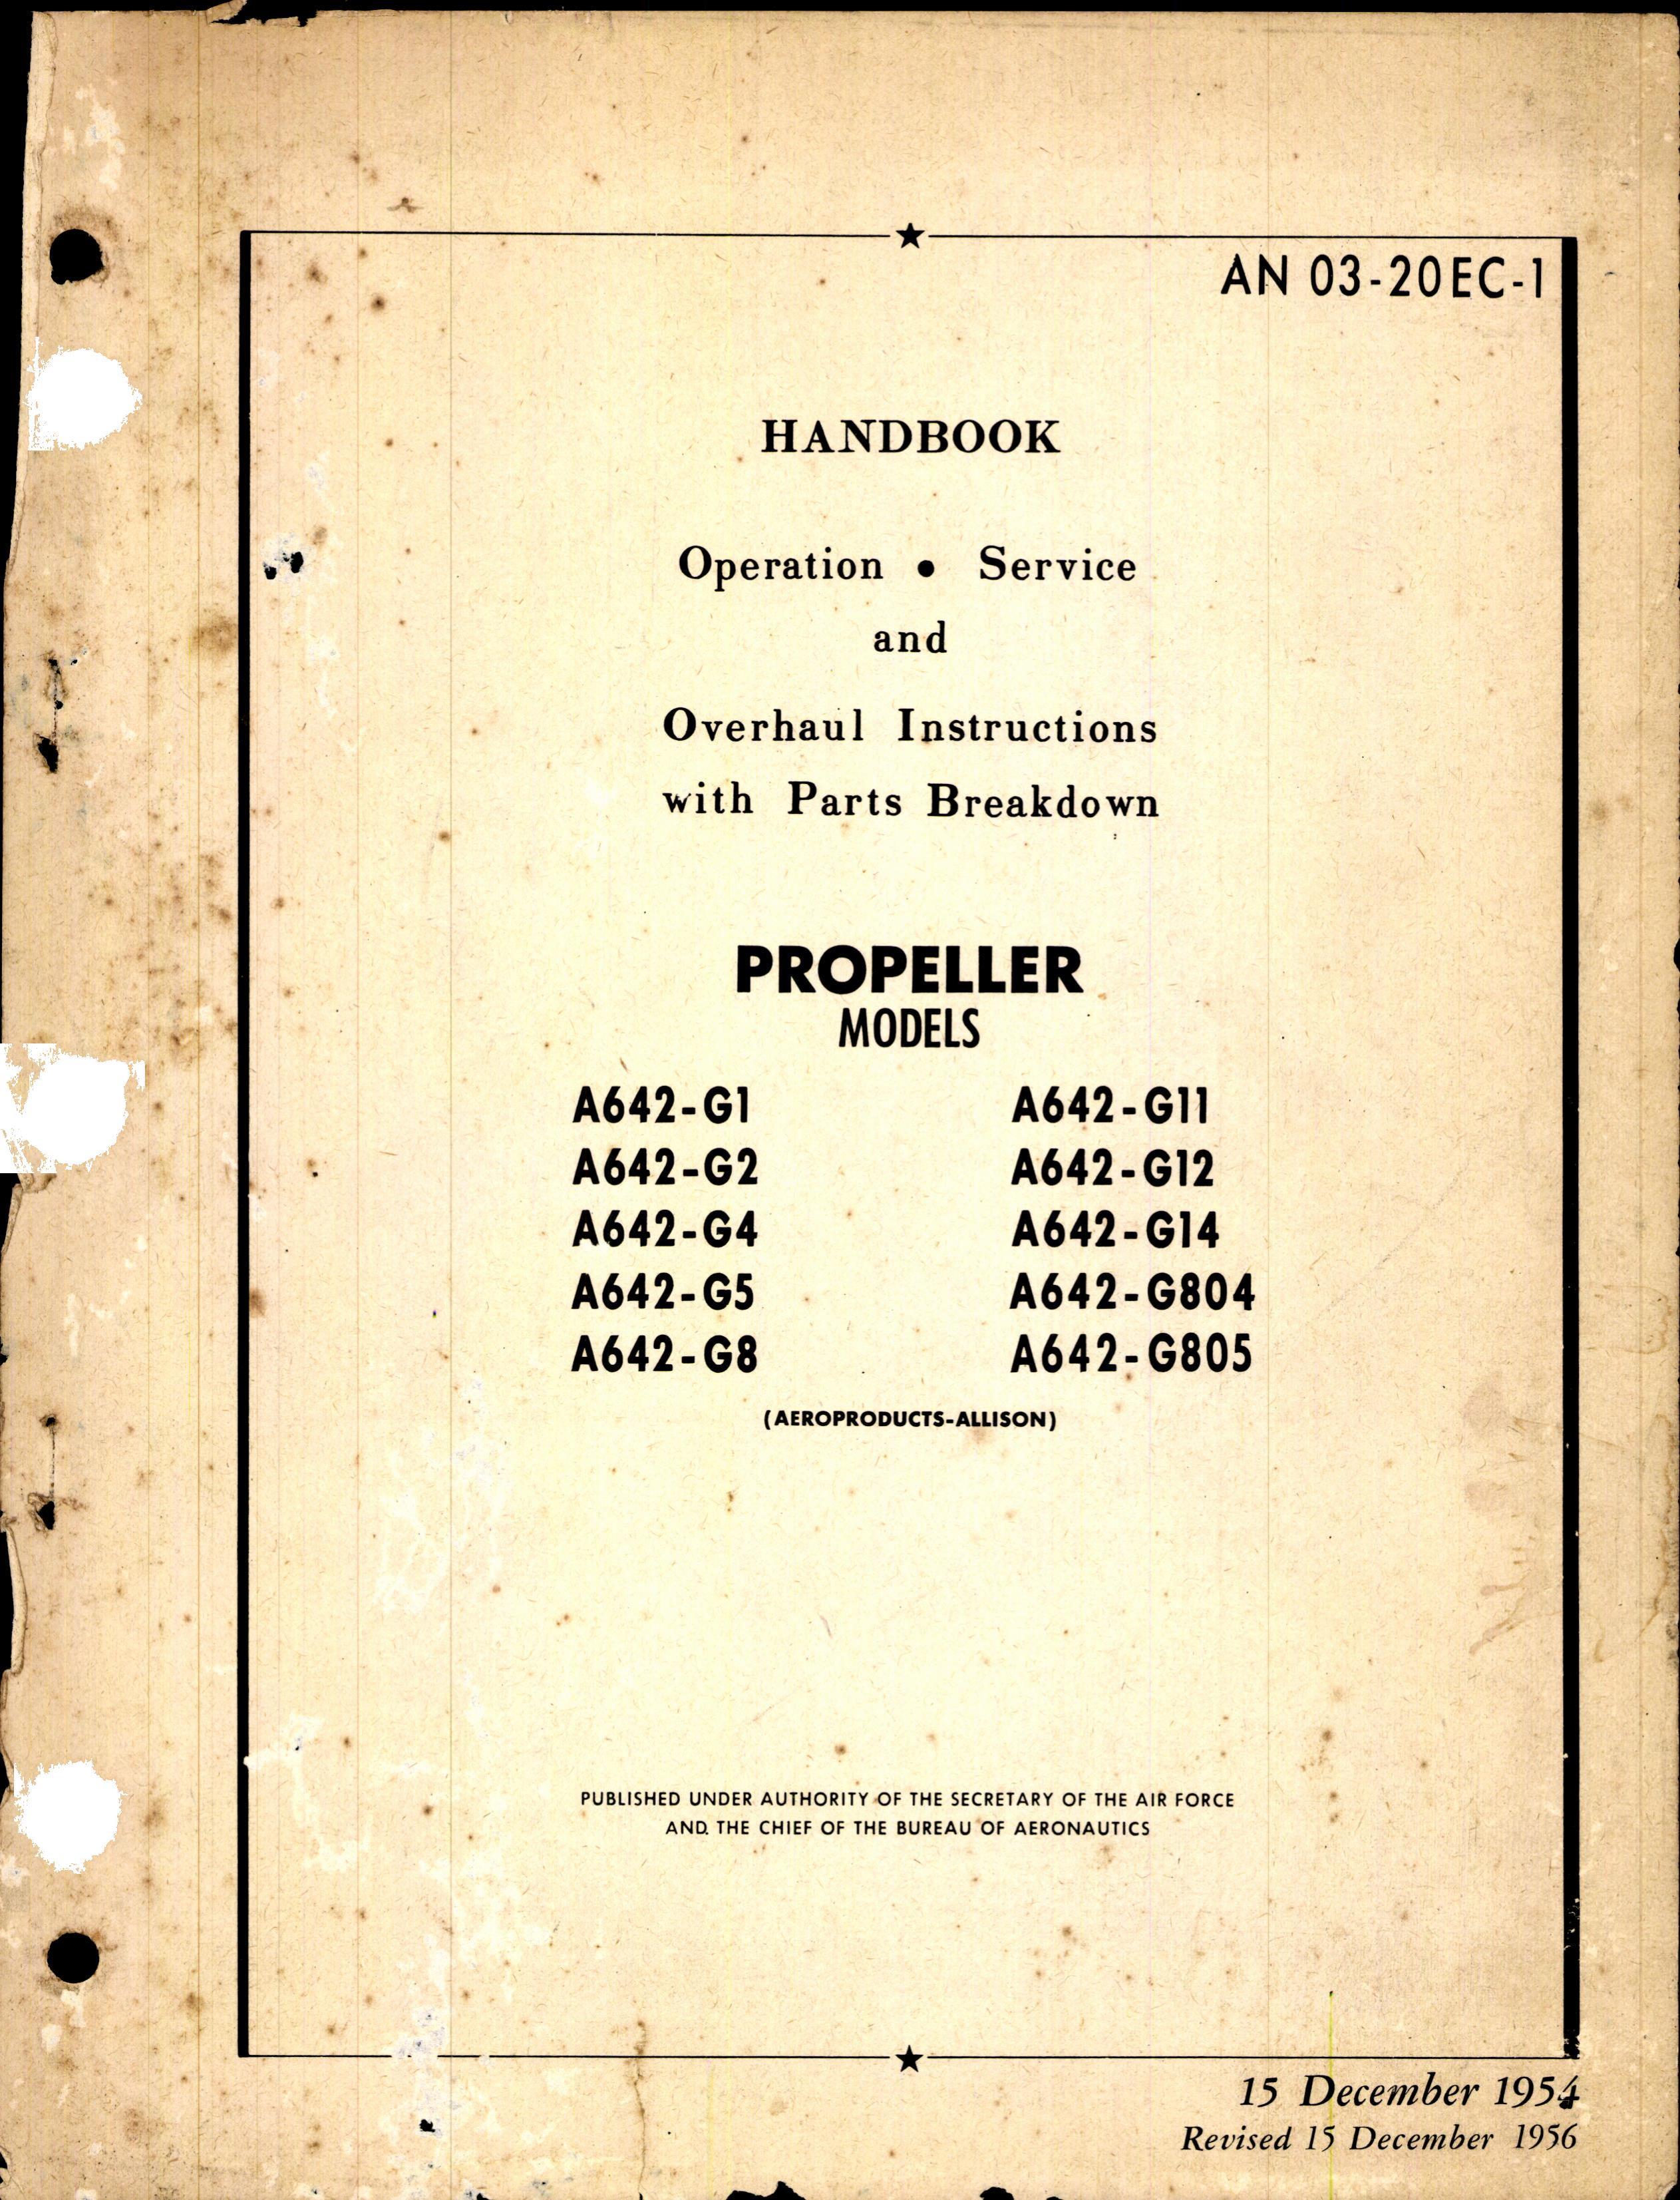 Sample page 1 from AirCorps Library document: Operation, Service, & Overhaul Instructions with Parts Breakdown for Propeller Models A642